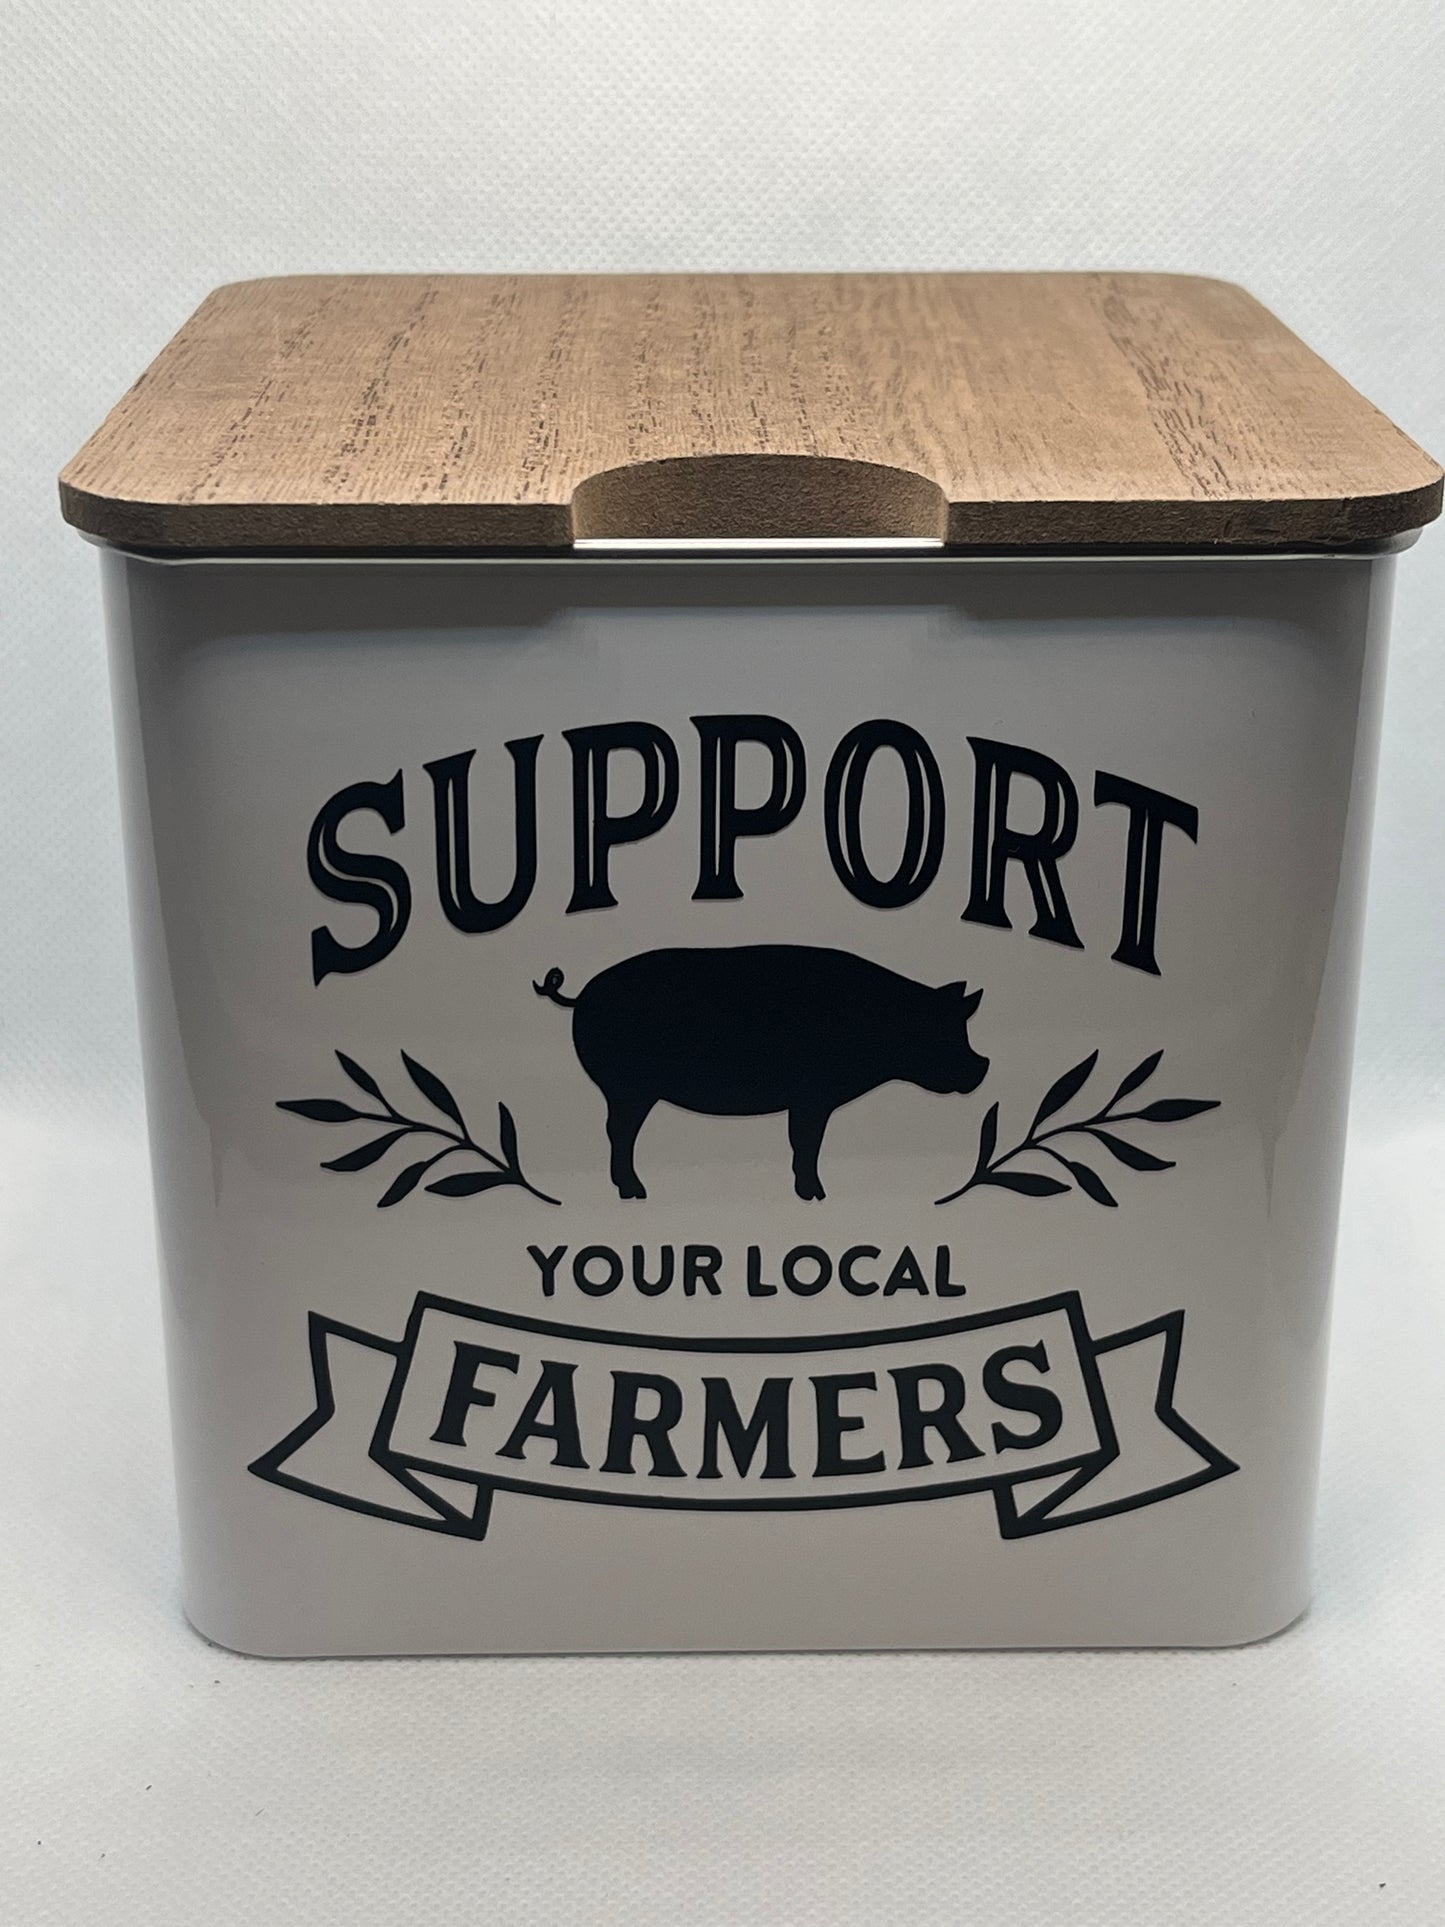 Support Your Local Farmers-Metal Storage Box (Large) w/Vinyl Decal Application